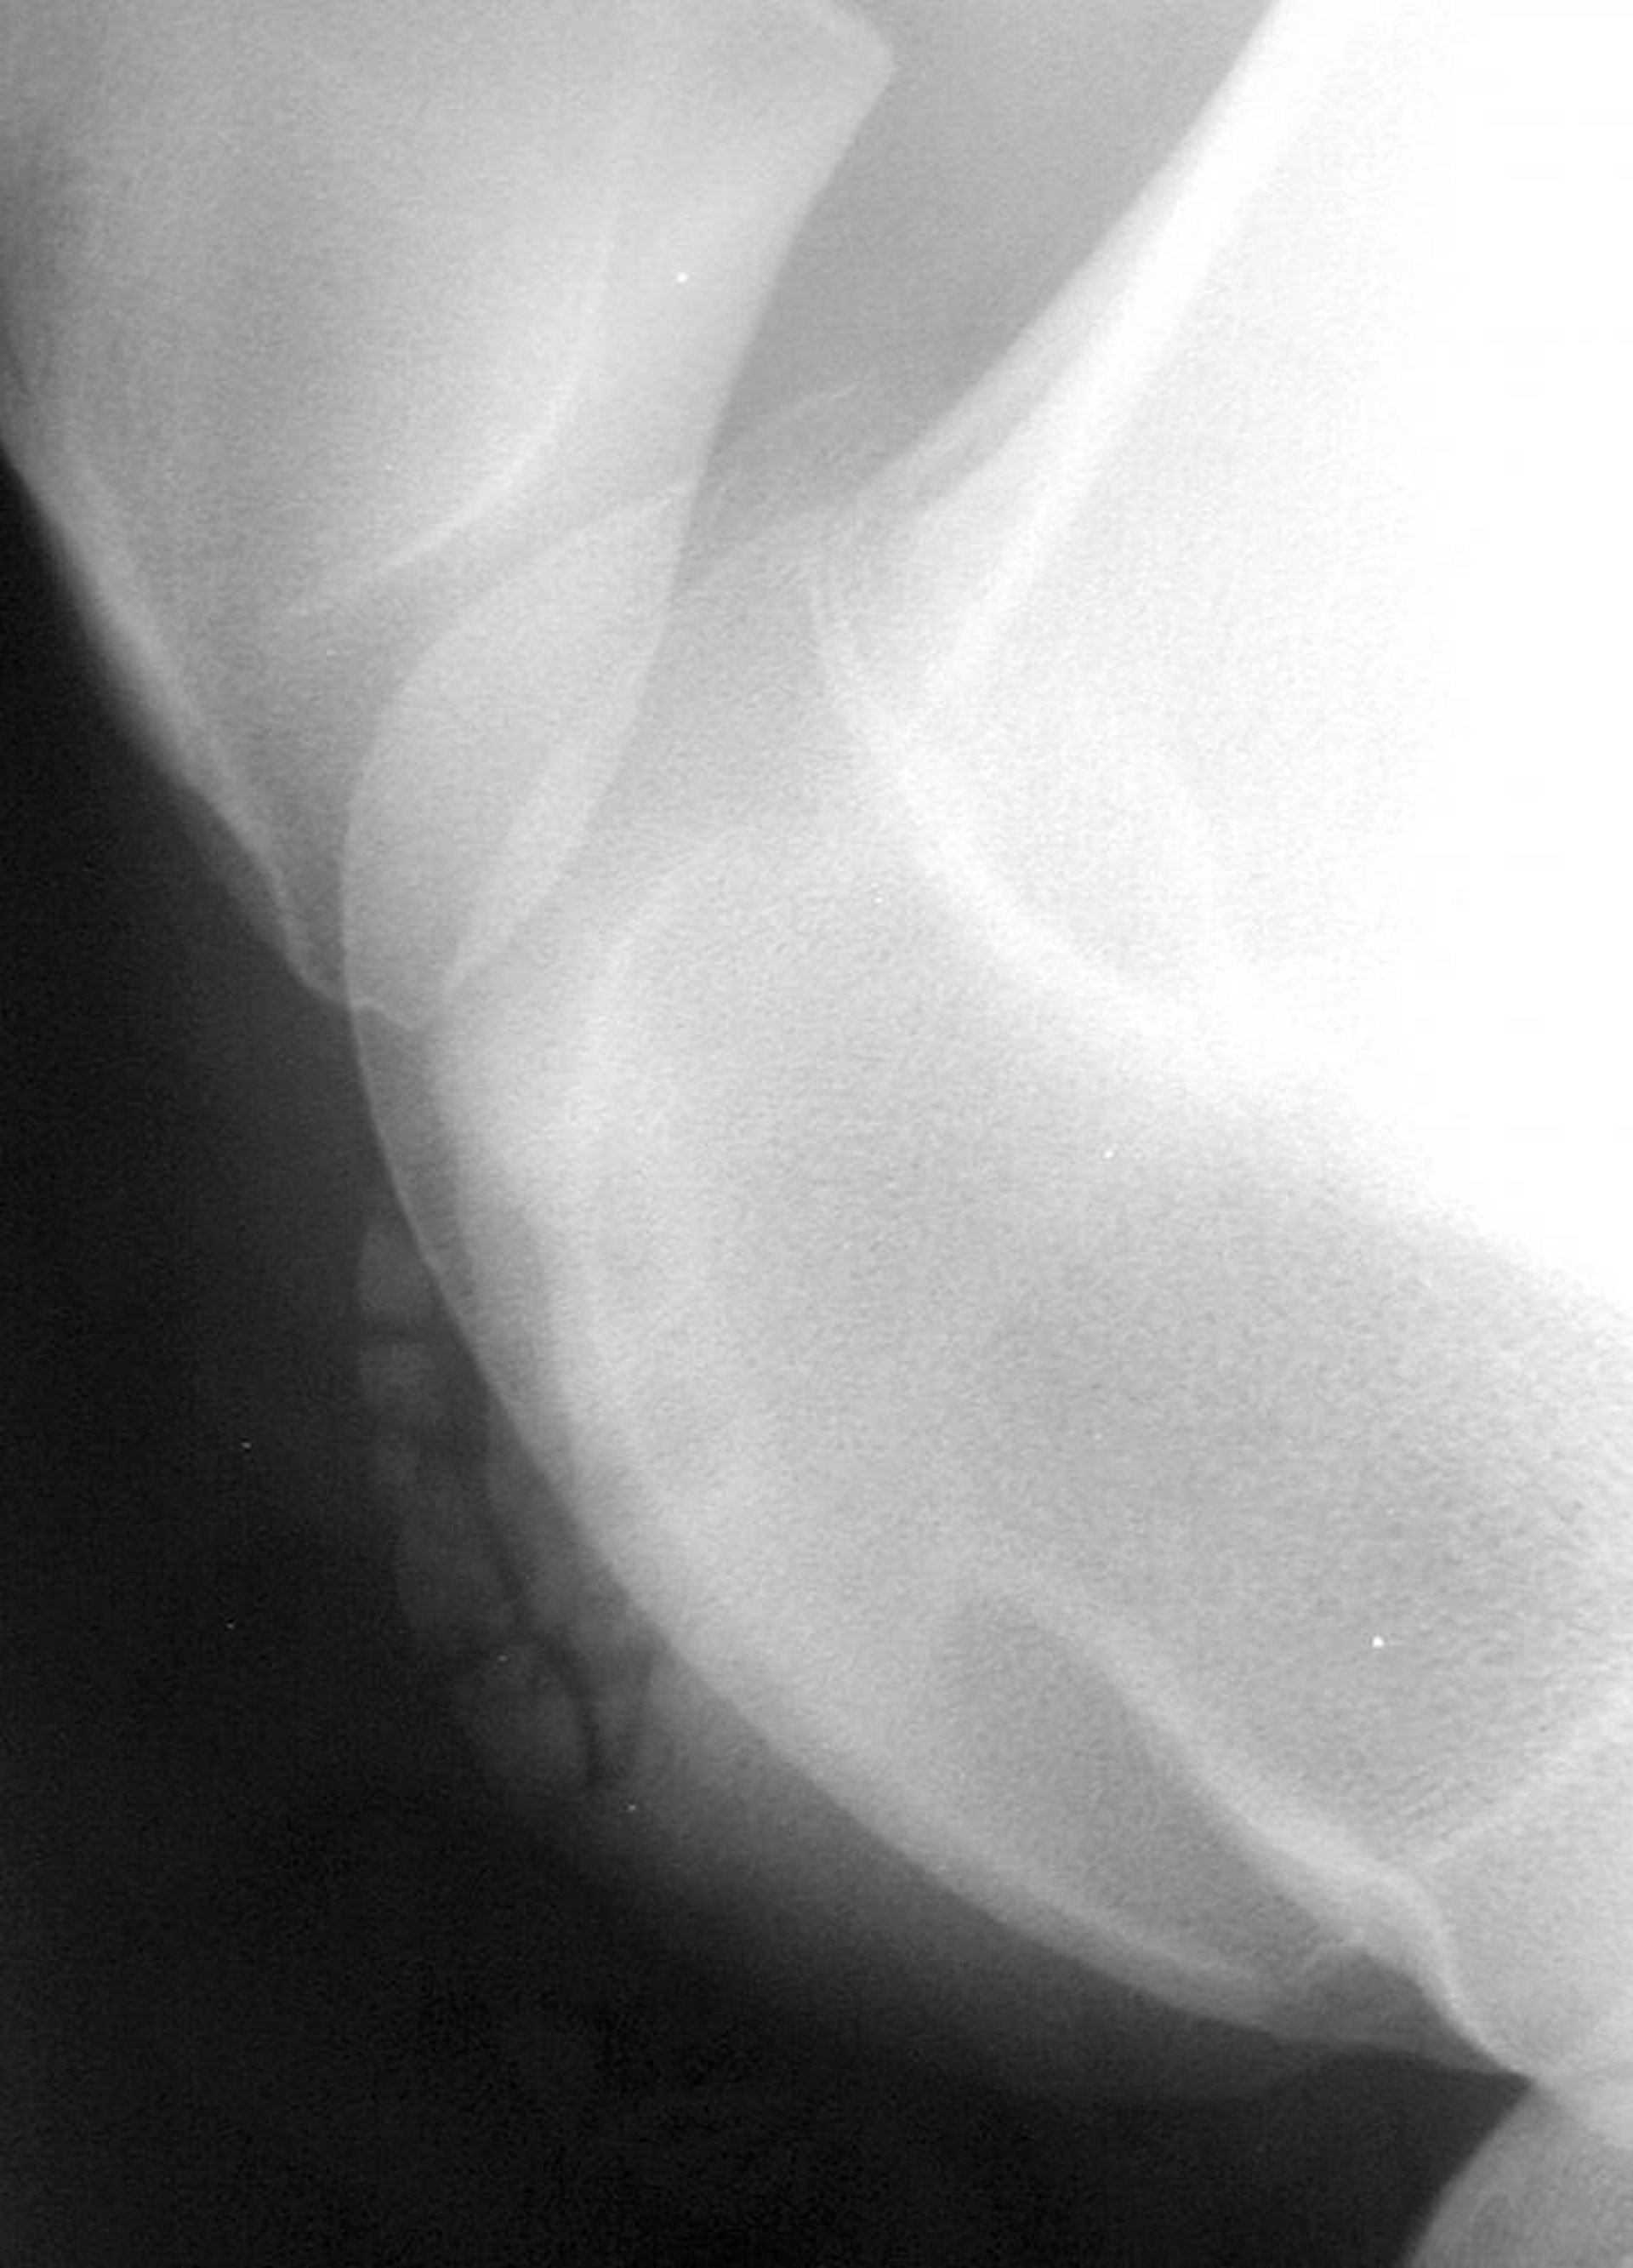 Osteochodrosis lesion, lateral trochlear ridge of the distal femur, stifle joint, horse